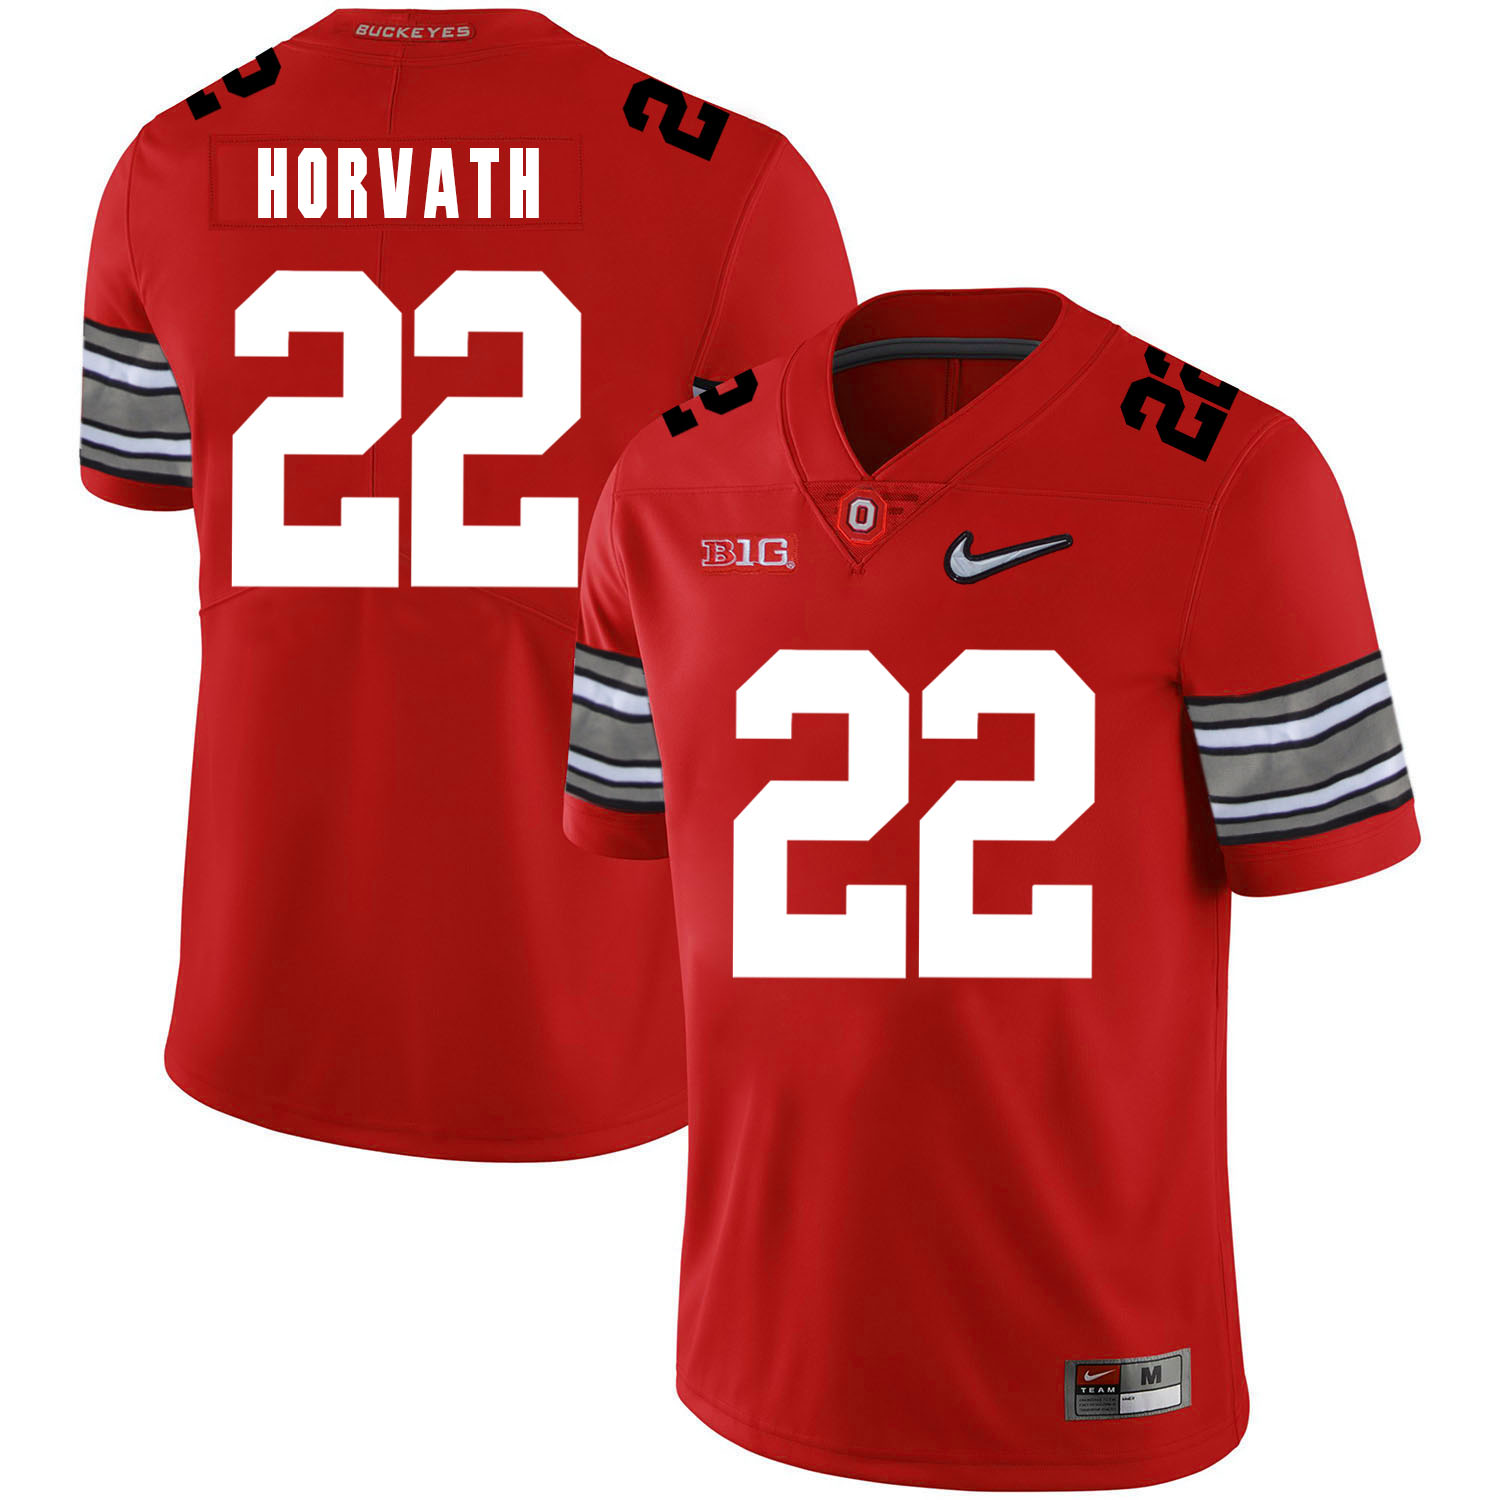 Ohio State Buckeyes 22 Les Horvath Red Diamond Nike Logo College Football Jersey